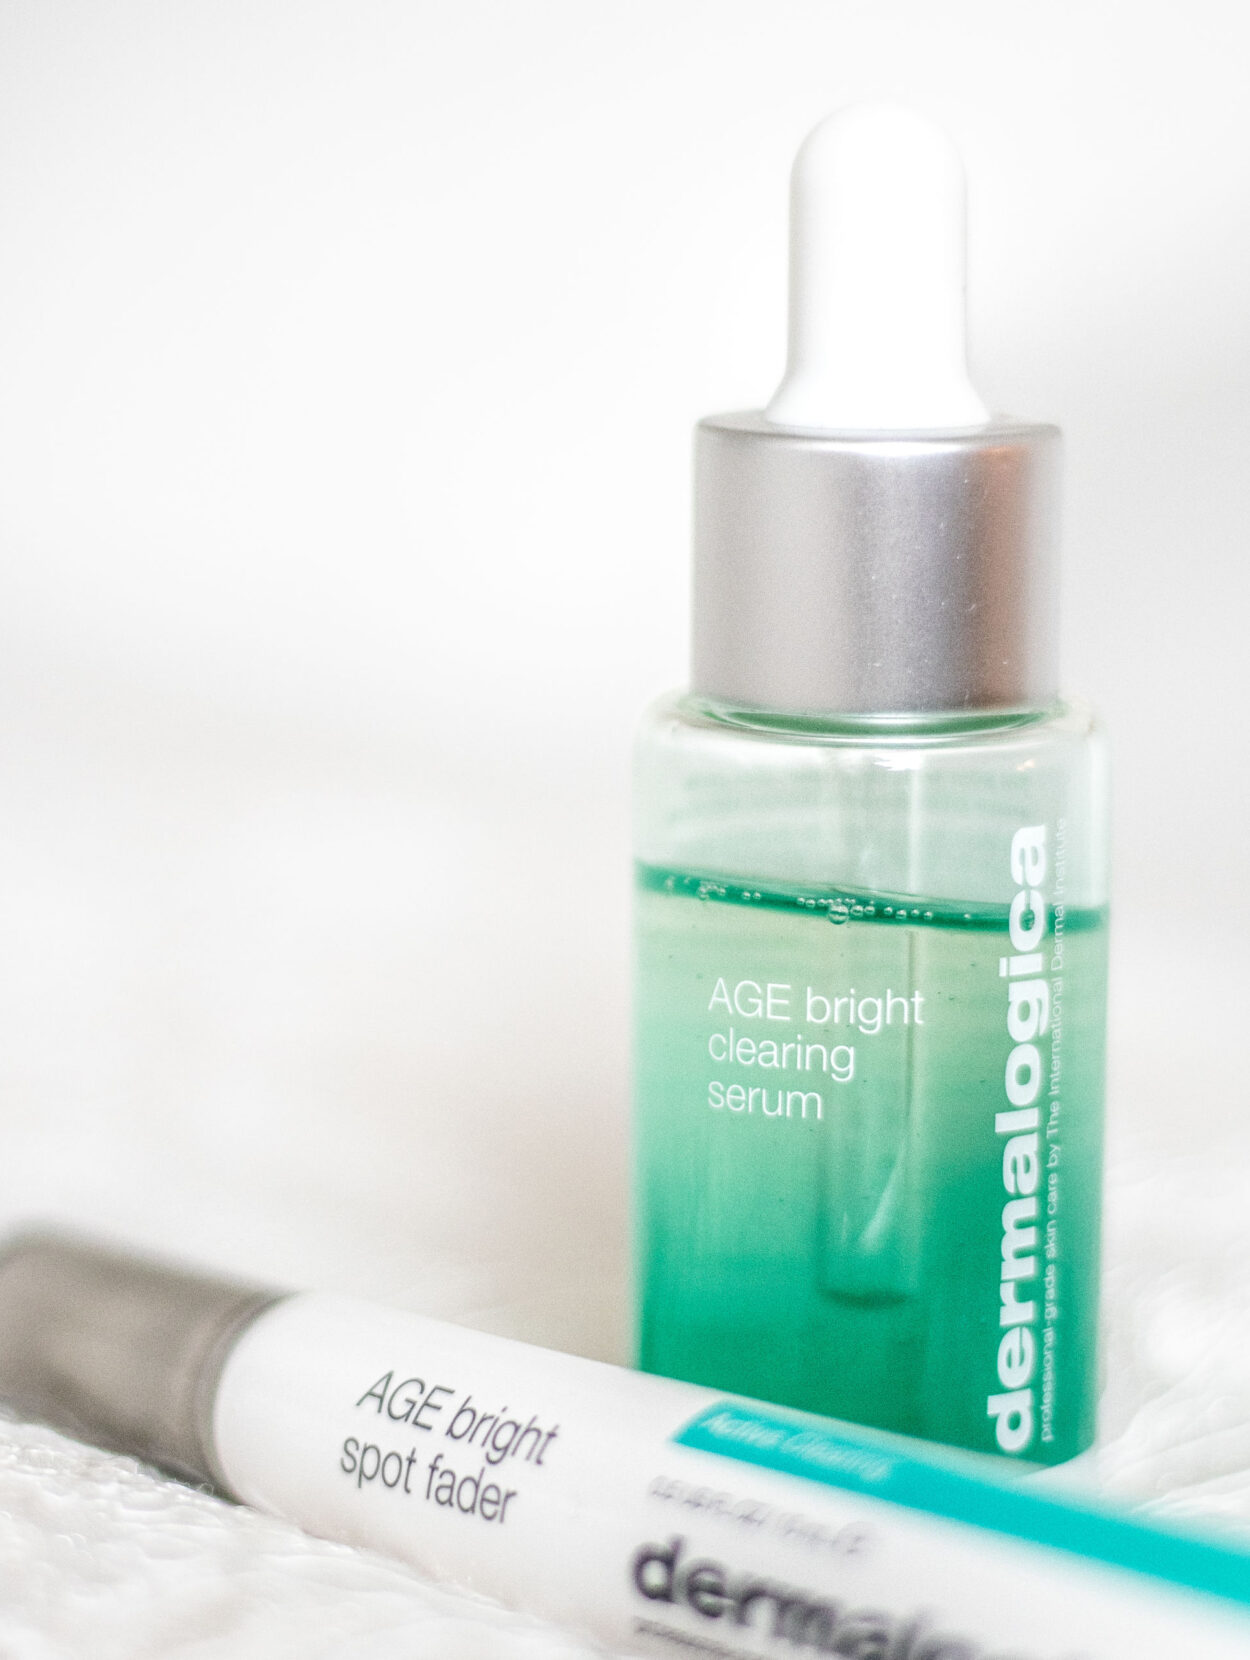 Dermalogica AGE Bright Clearing Serum and Spot Fader